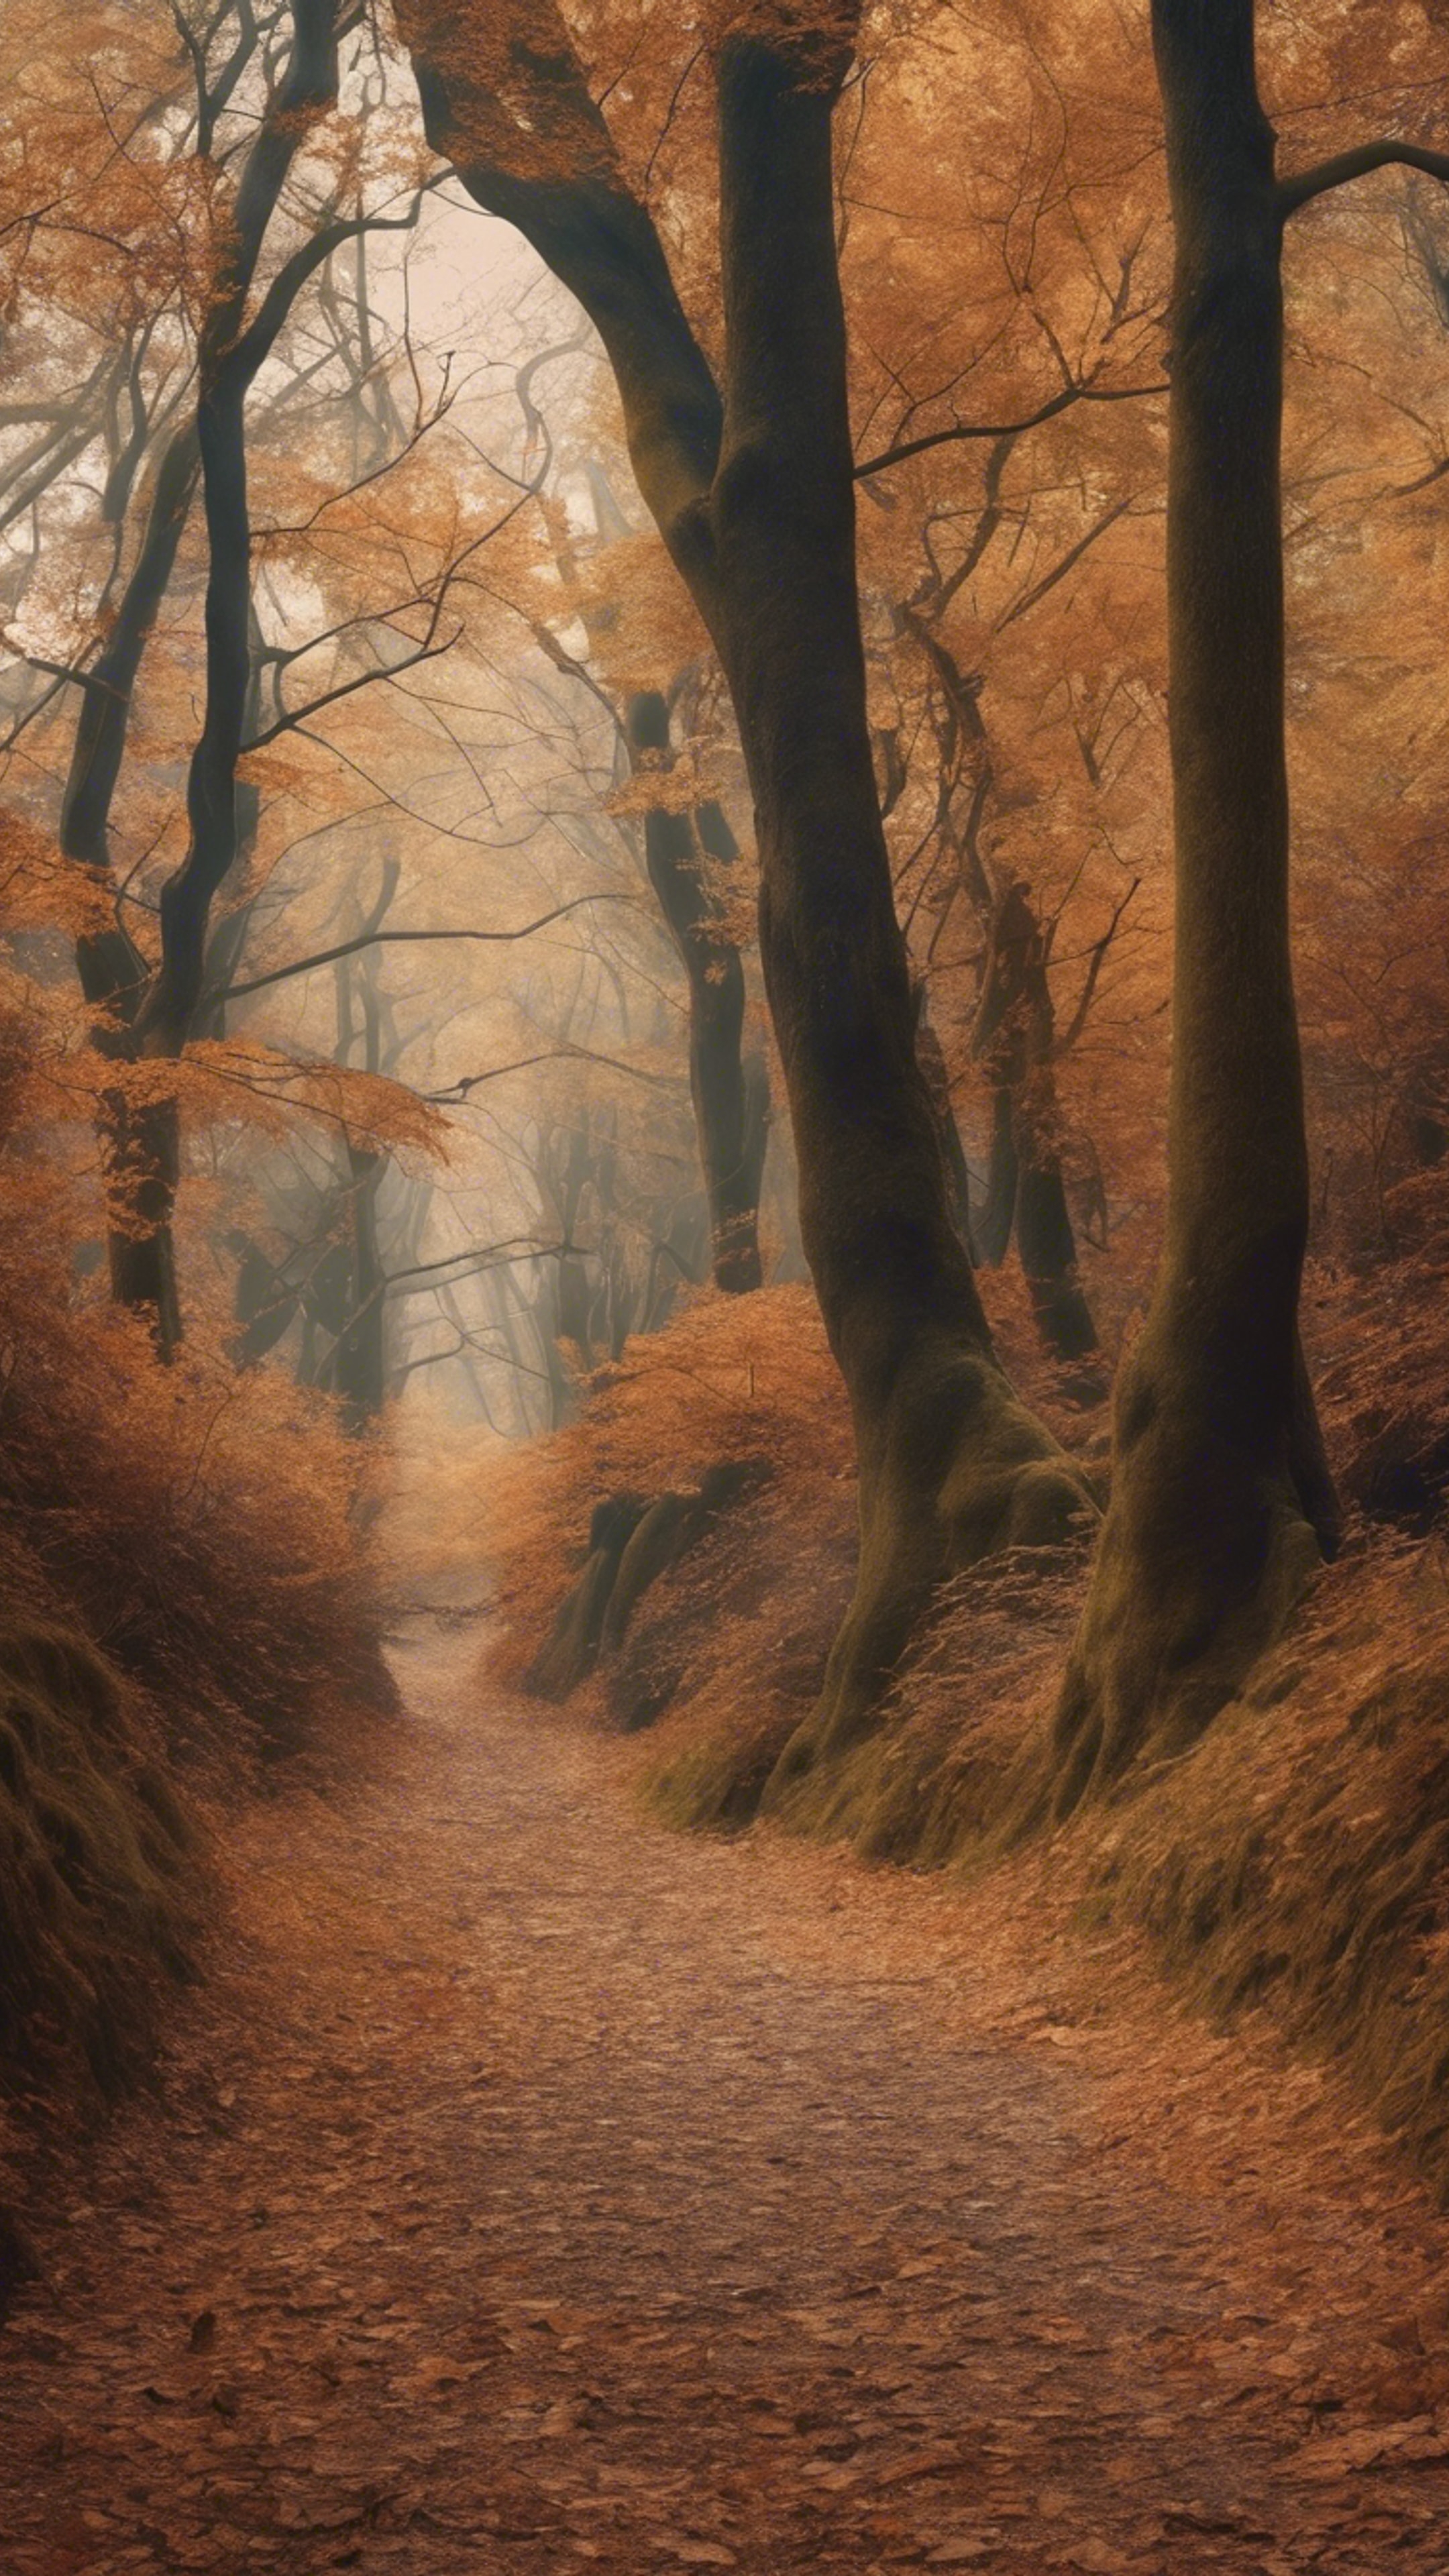 A mystic forest path covered in crunchy brown autumn leaves Hintergrund[44e03b30ee0343628942]